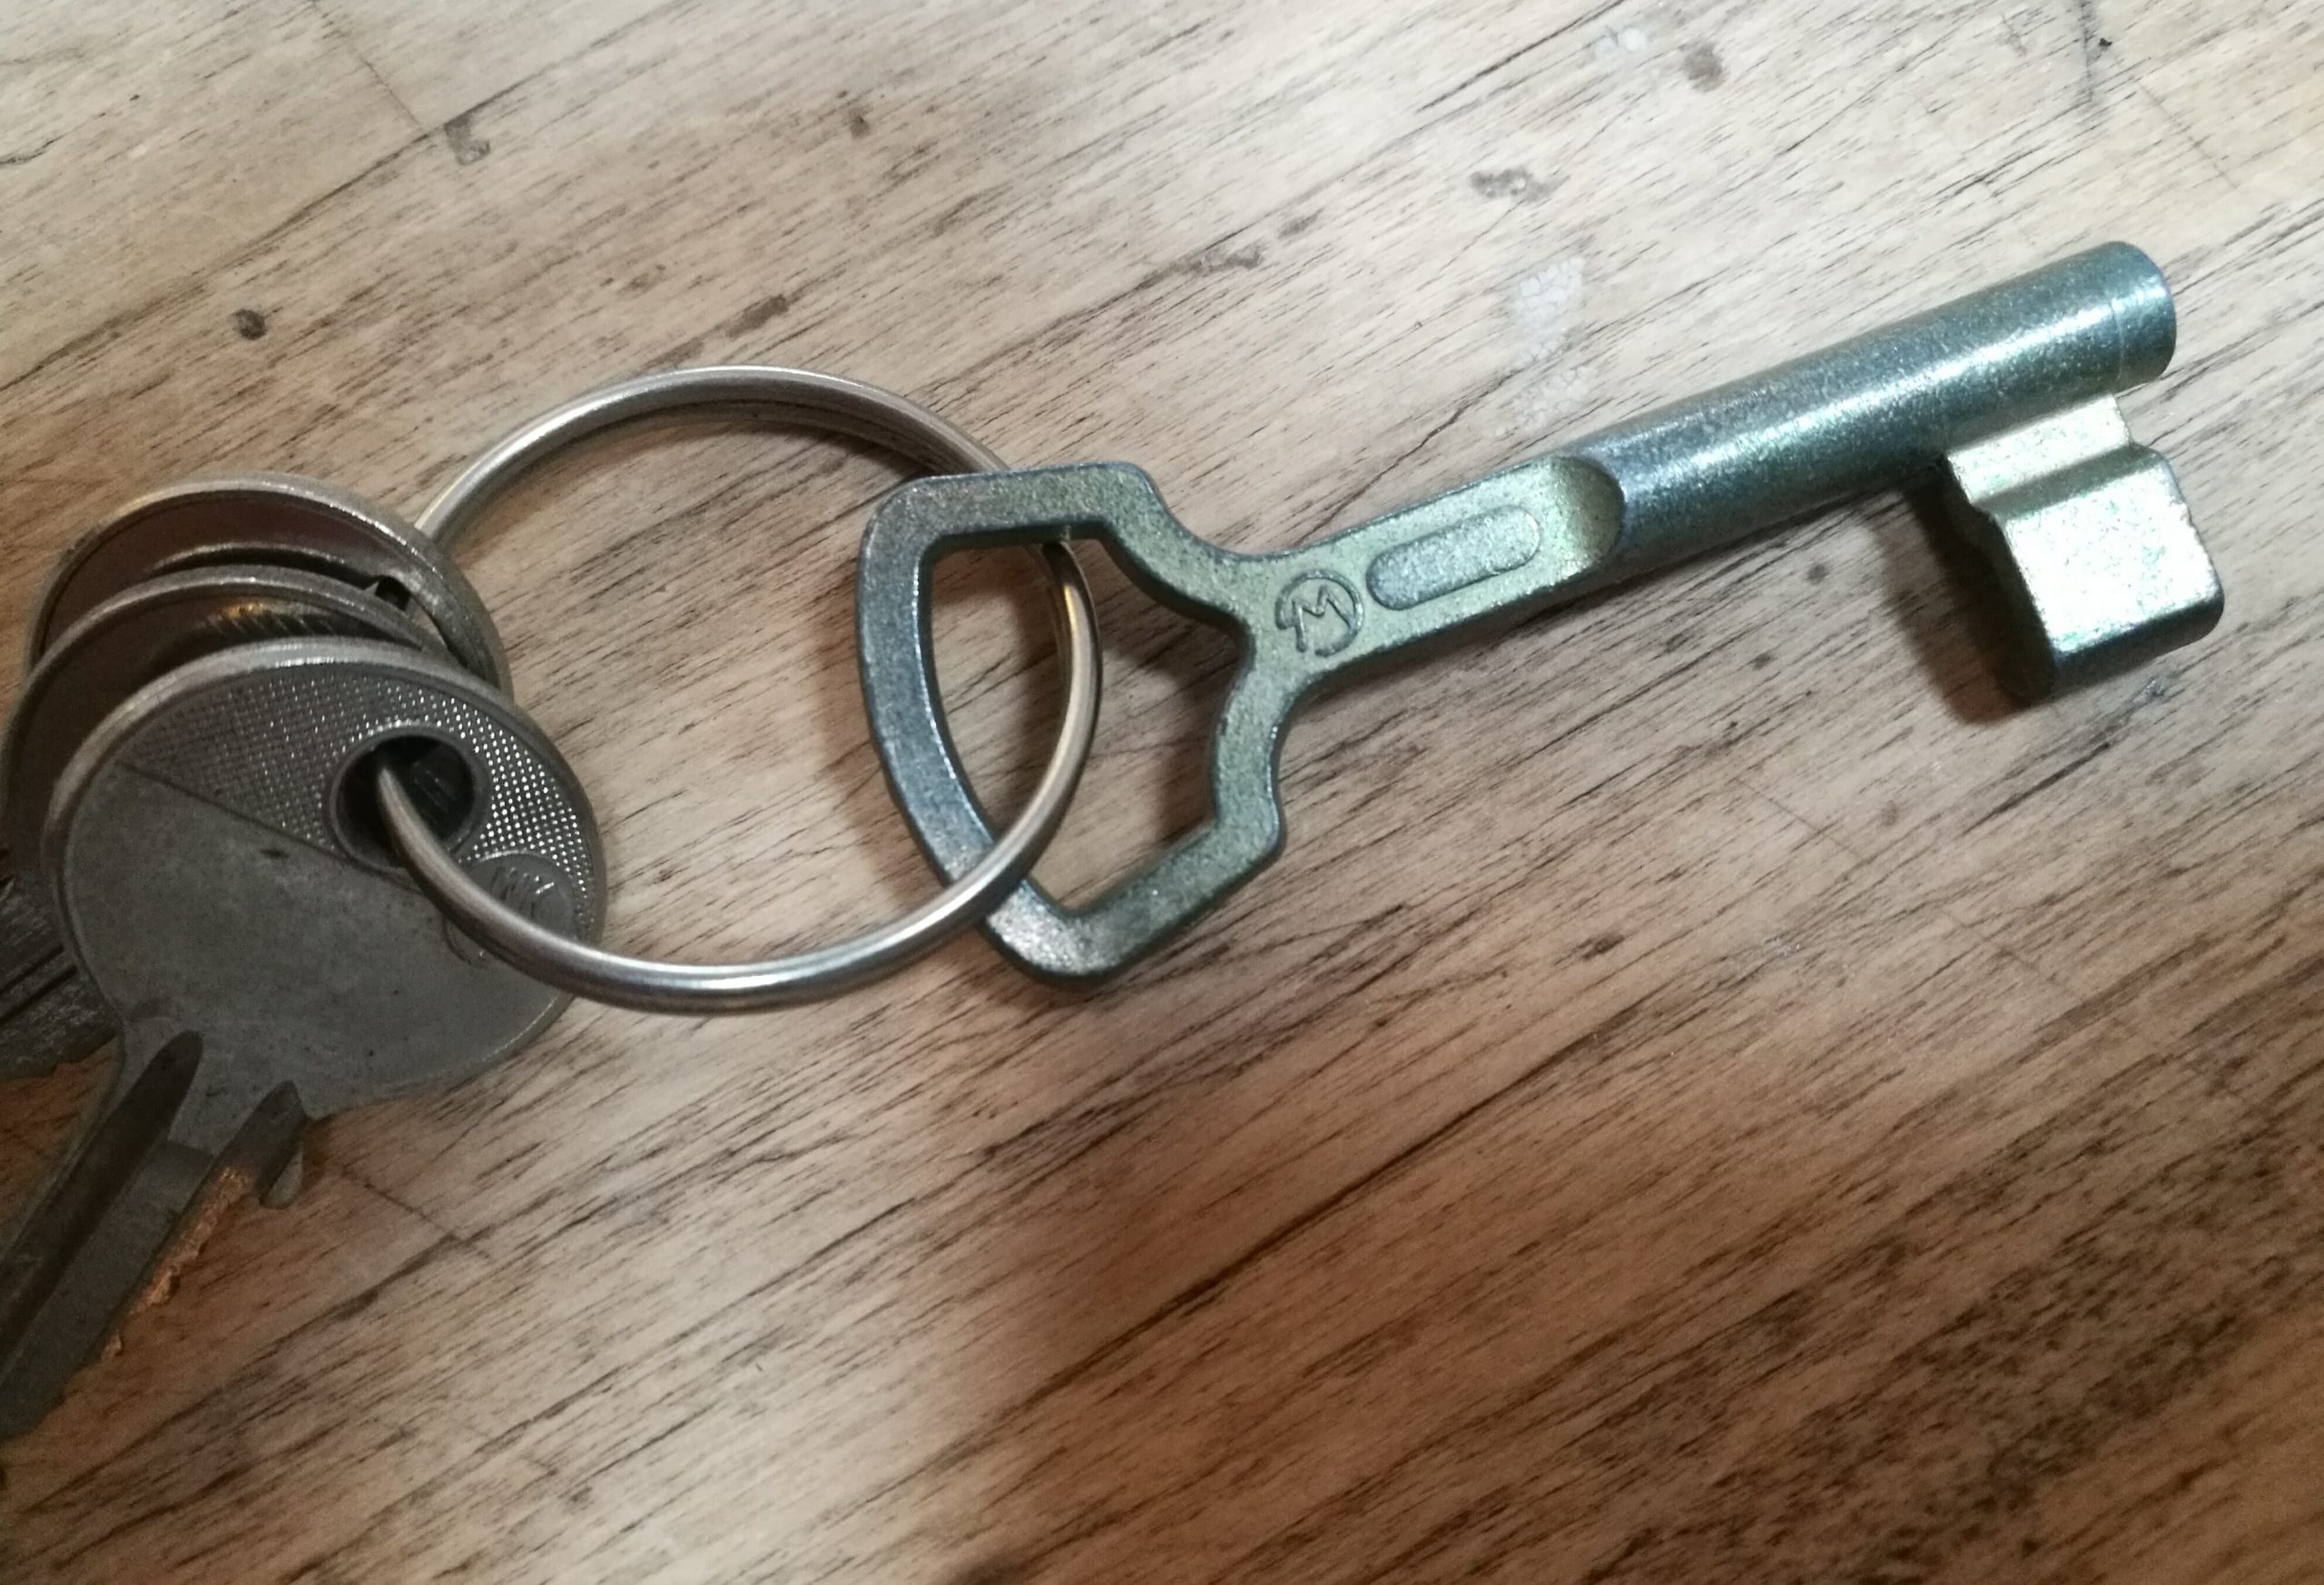 IMAGE of keys from east germany